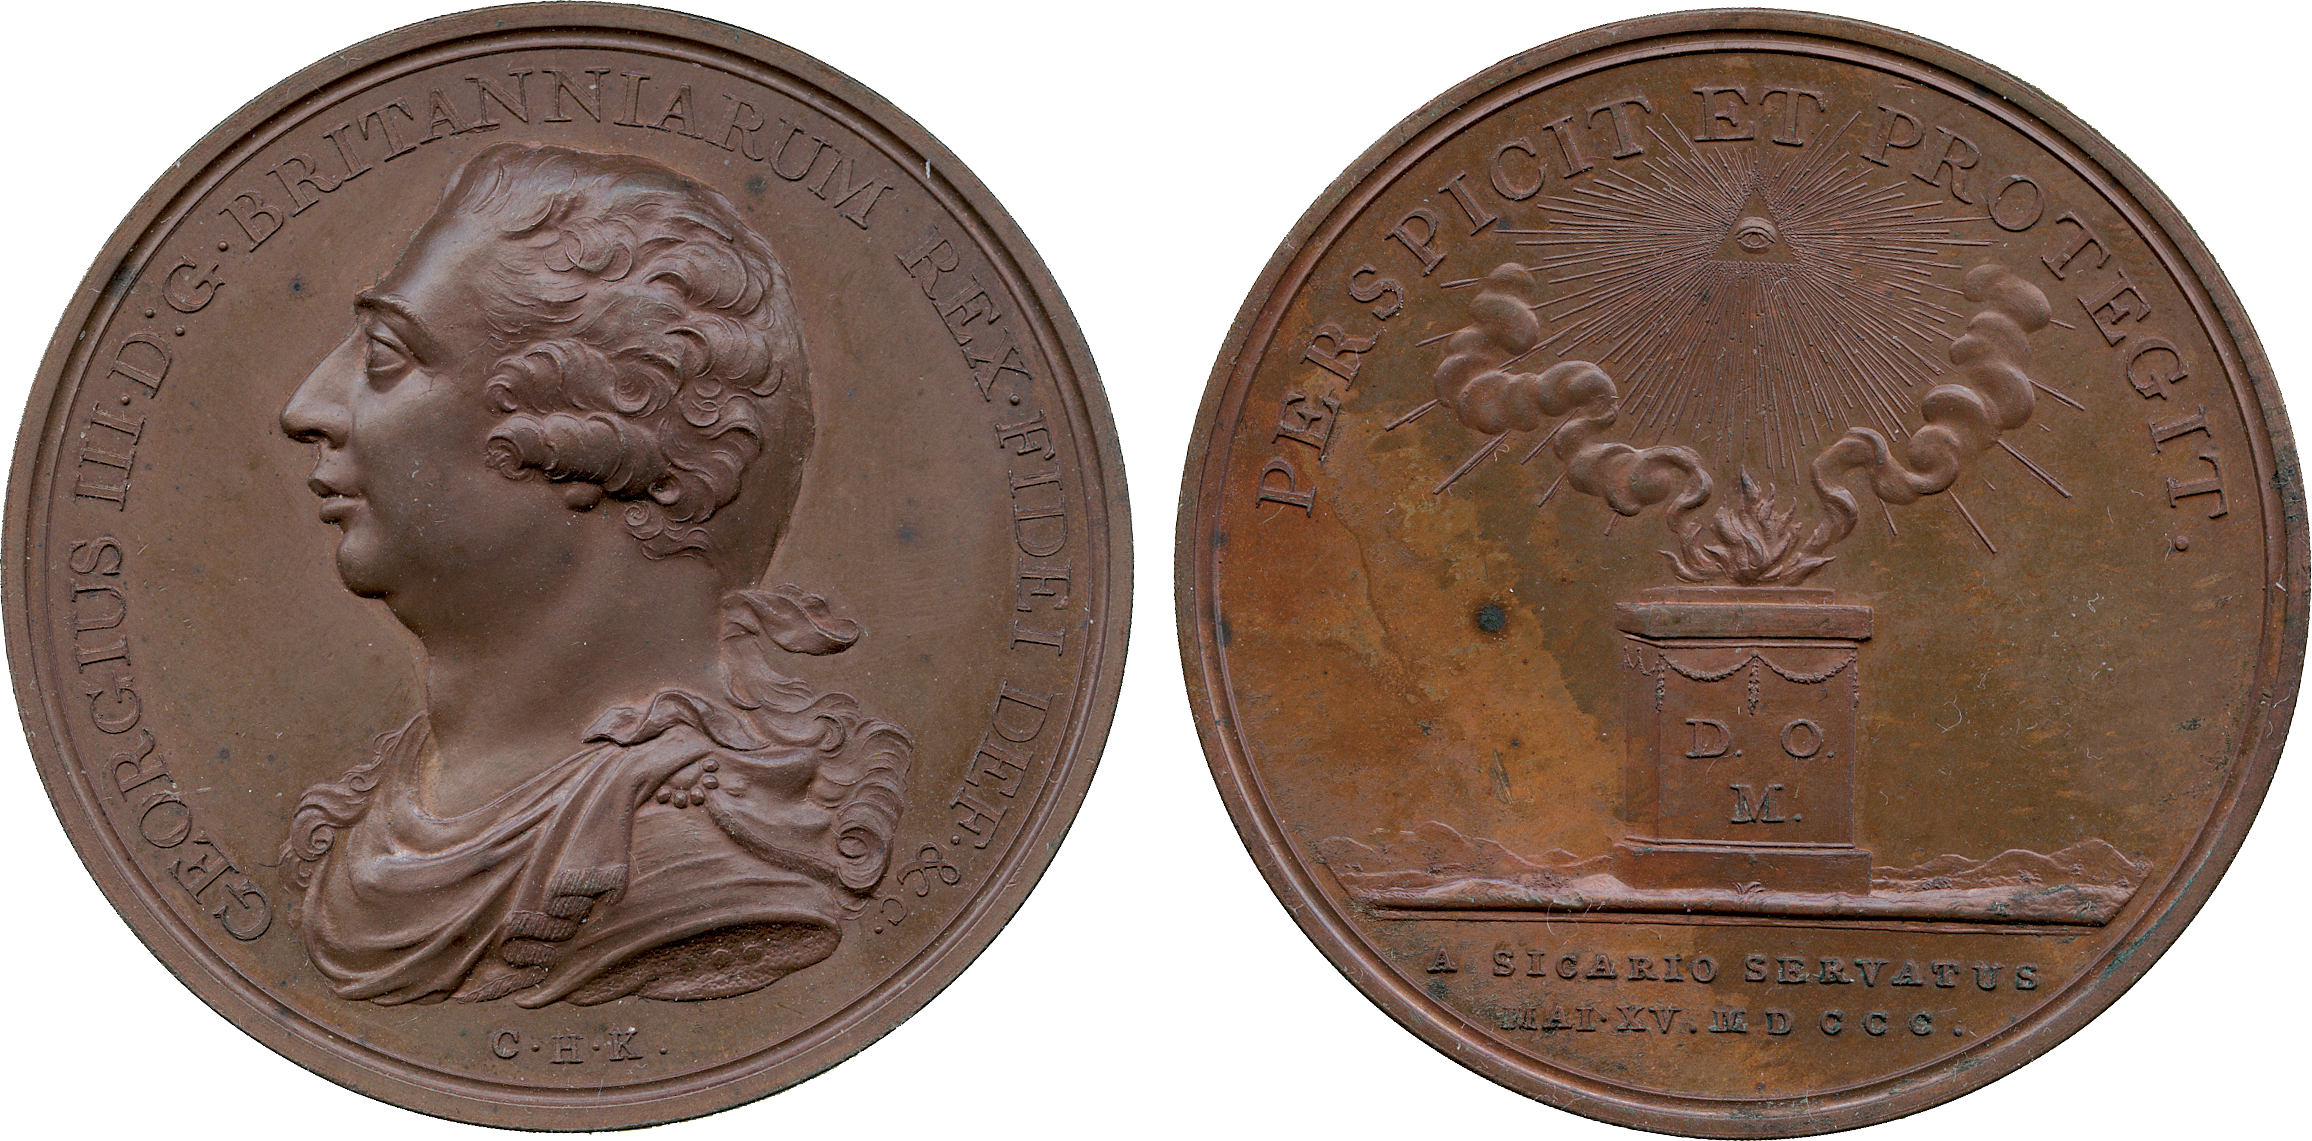 COMMEMORATIVE MEDALS, BRITISH MEDALS, George III, Preserved from Assassination, 1800, Bronze